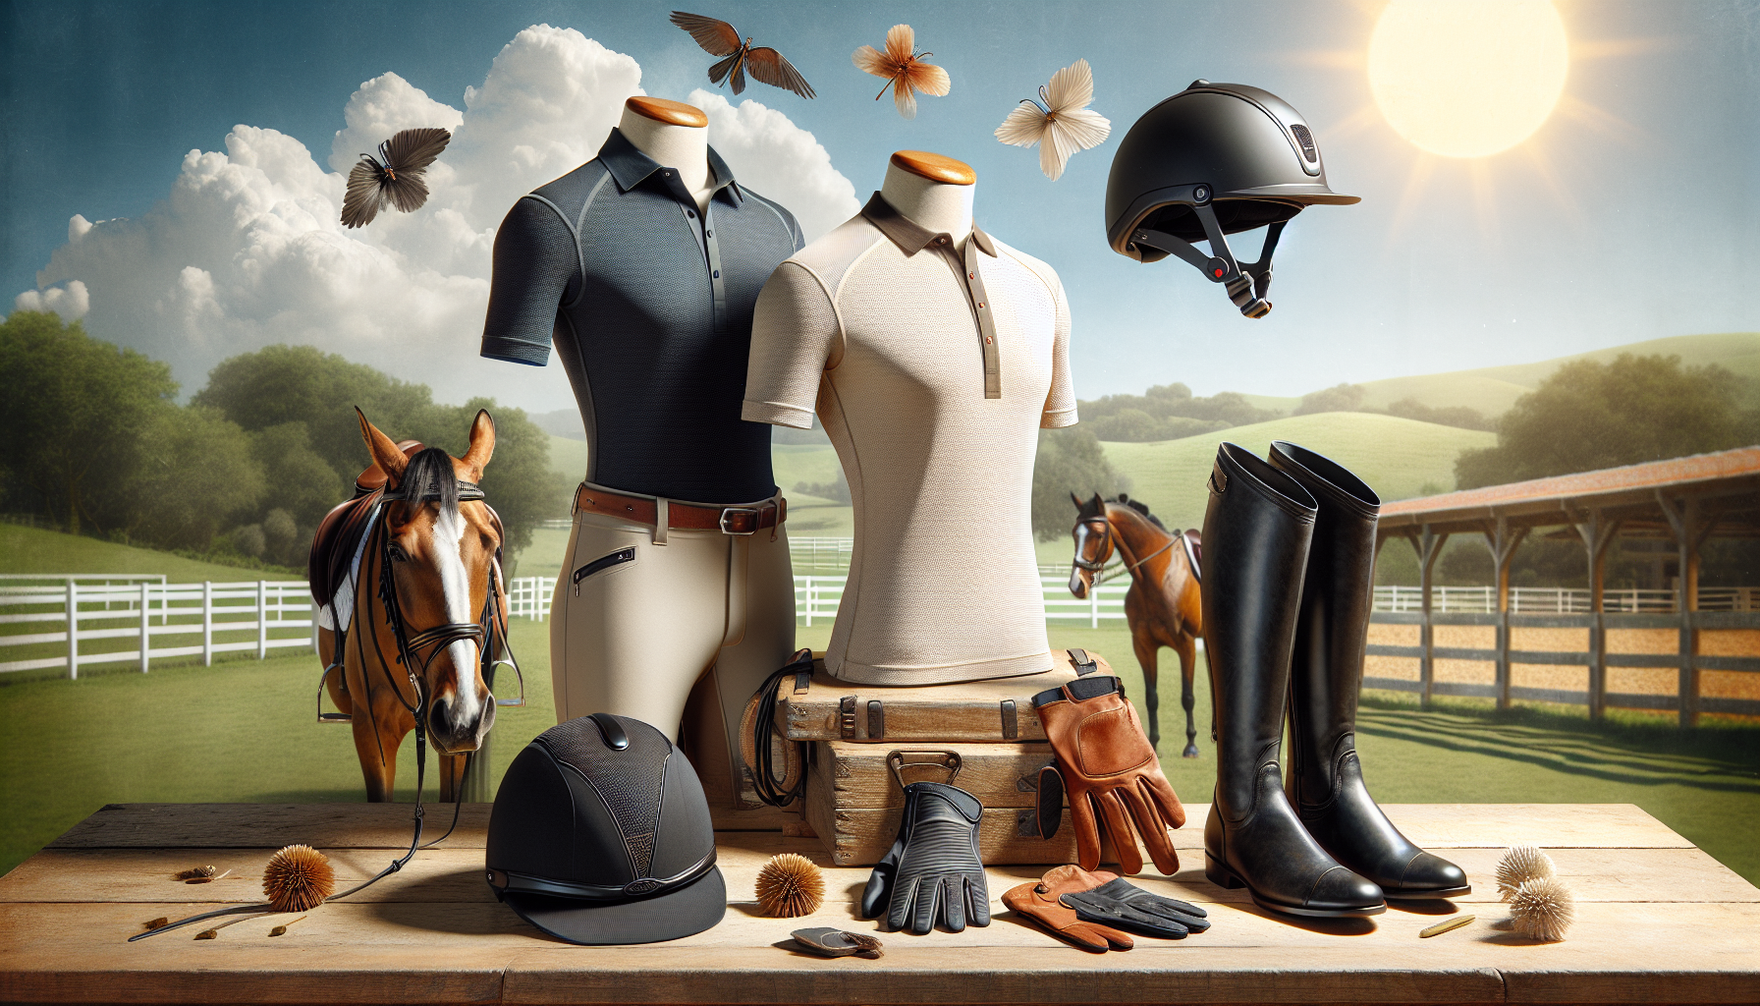 A visual depiction showcasing top equestrian apparel appropriate for warm weather ridden. The display incorporates a lightweight, breathable riding shirt paired with breeches. Accessories like a durab